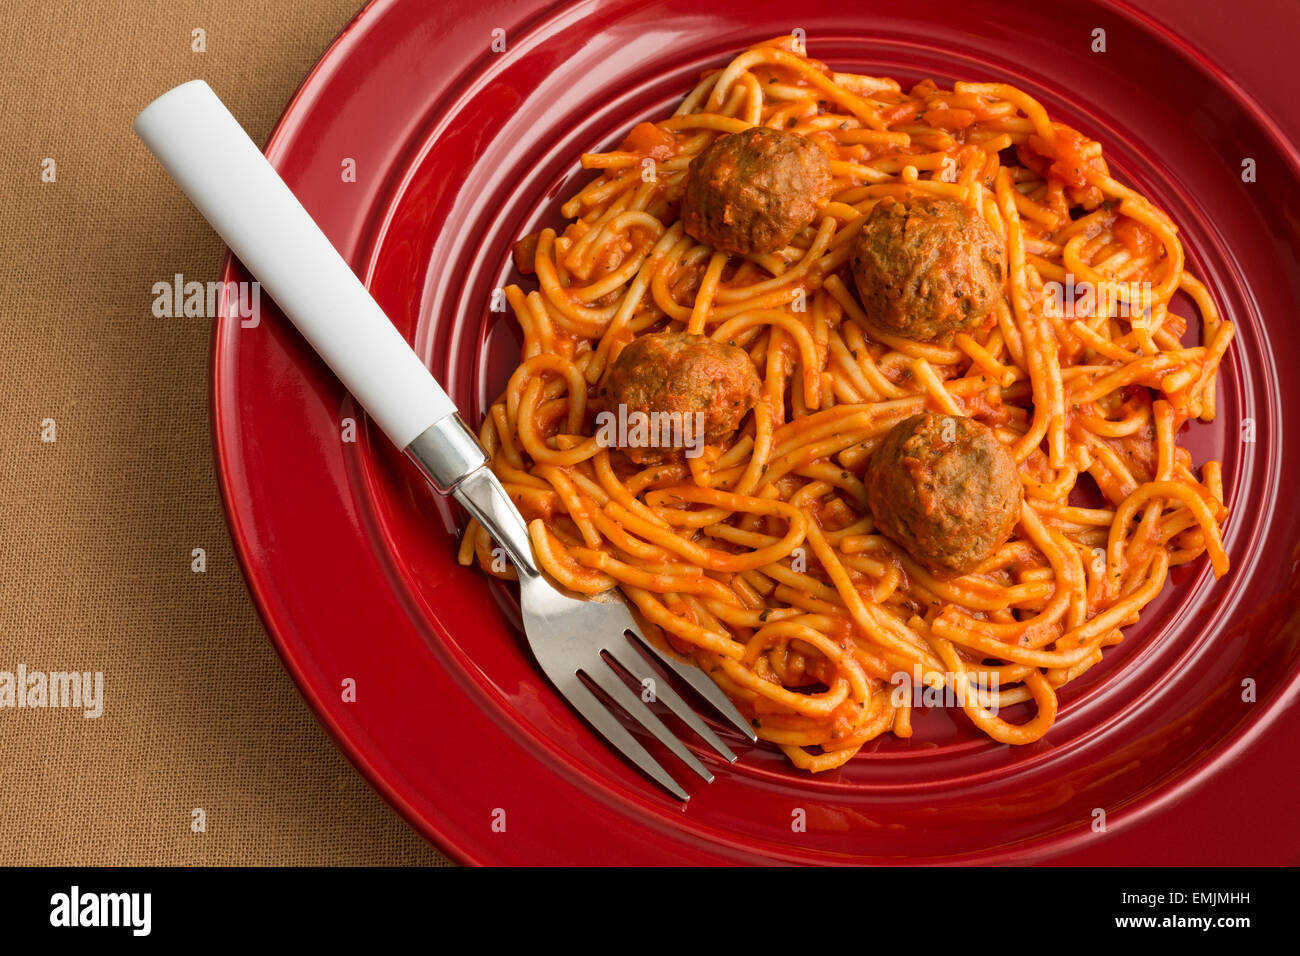 Top view of a spaghetti and meatball TV dinner on a red plate with a fork on a tan table cloth. Stock Photo